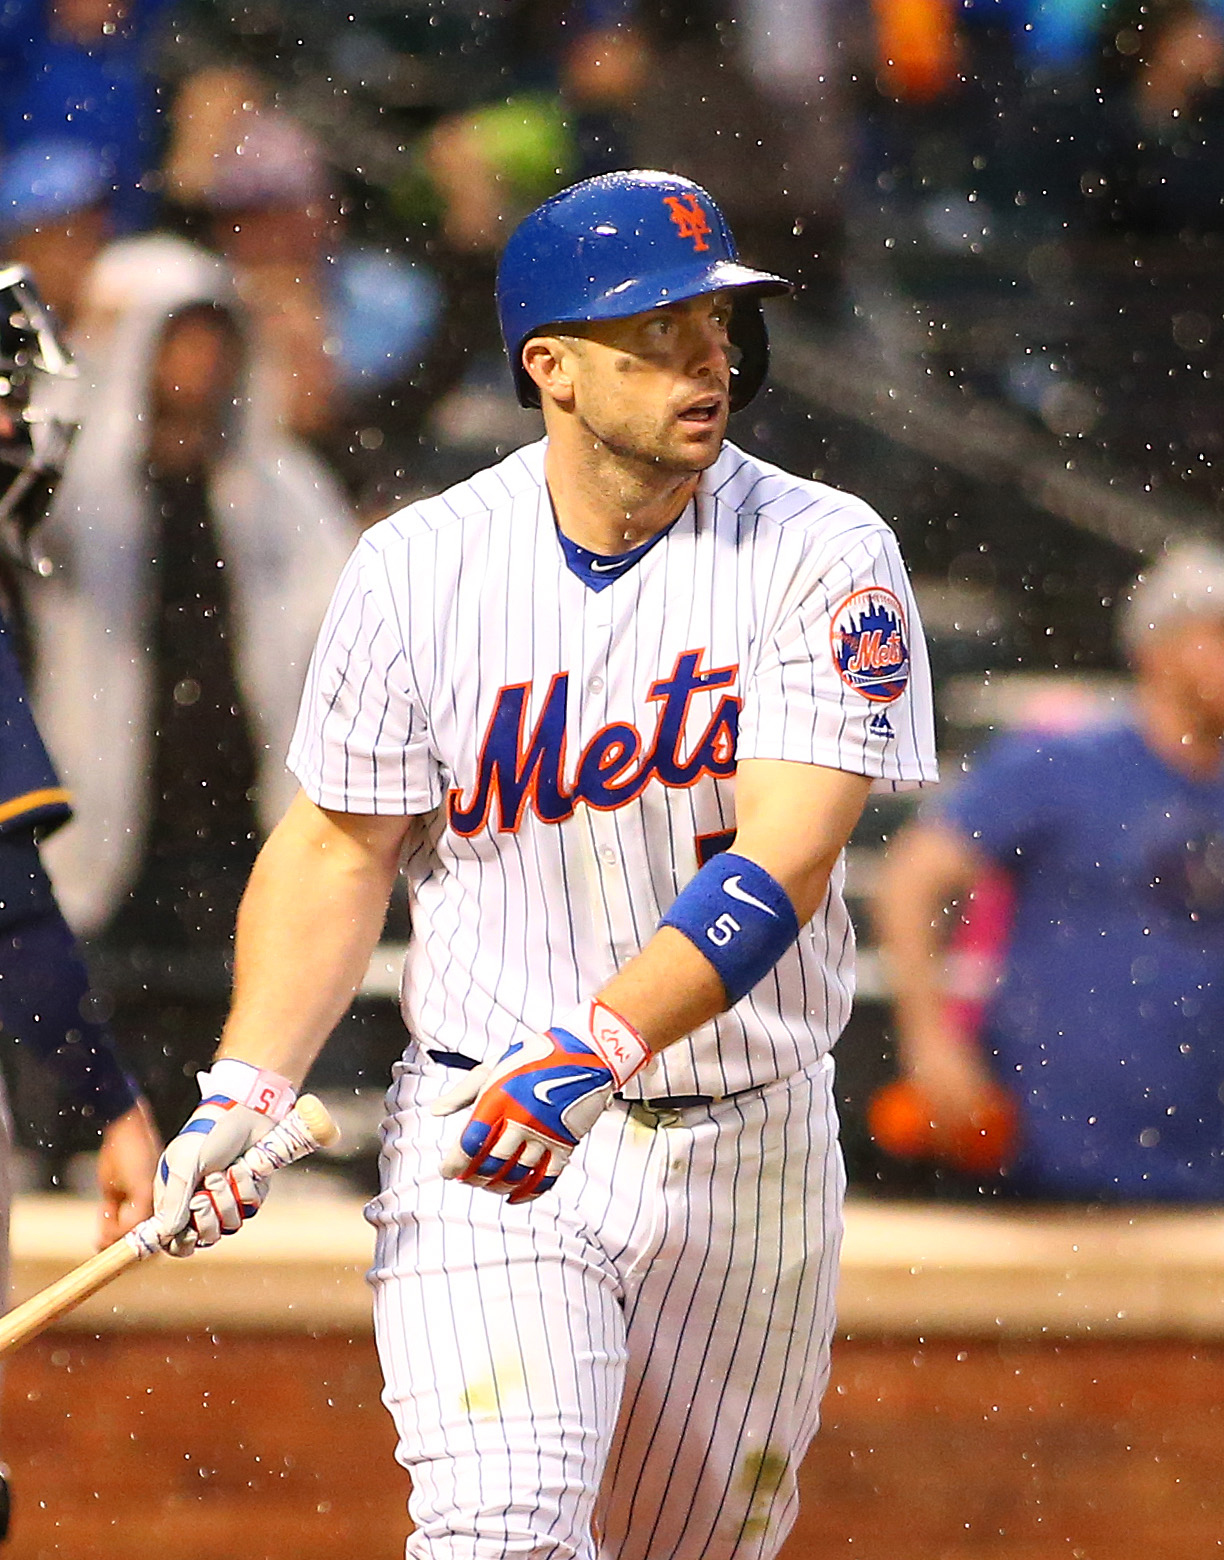 Mets did right by David Wright